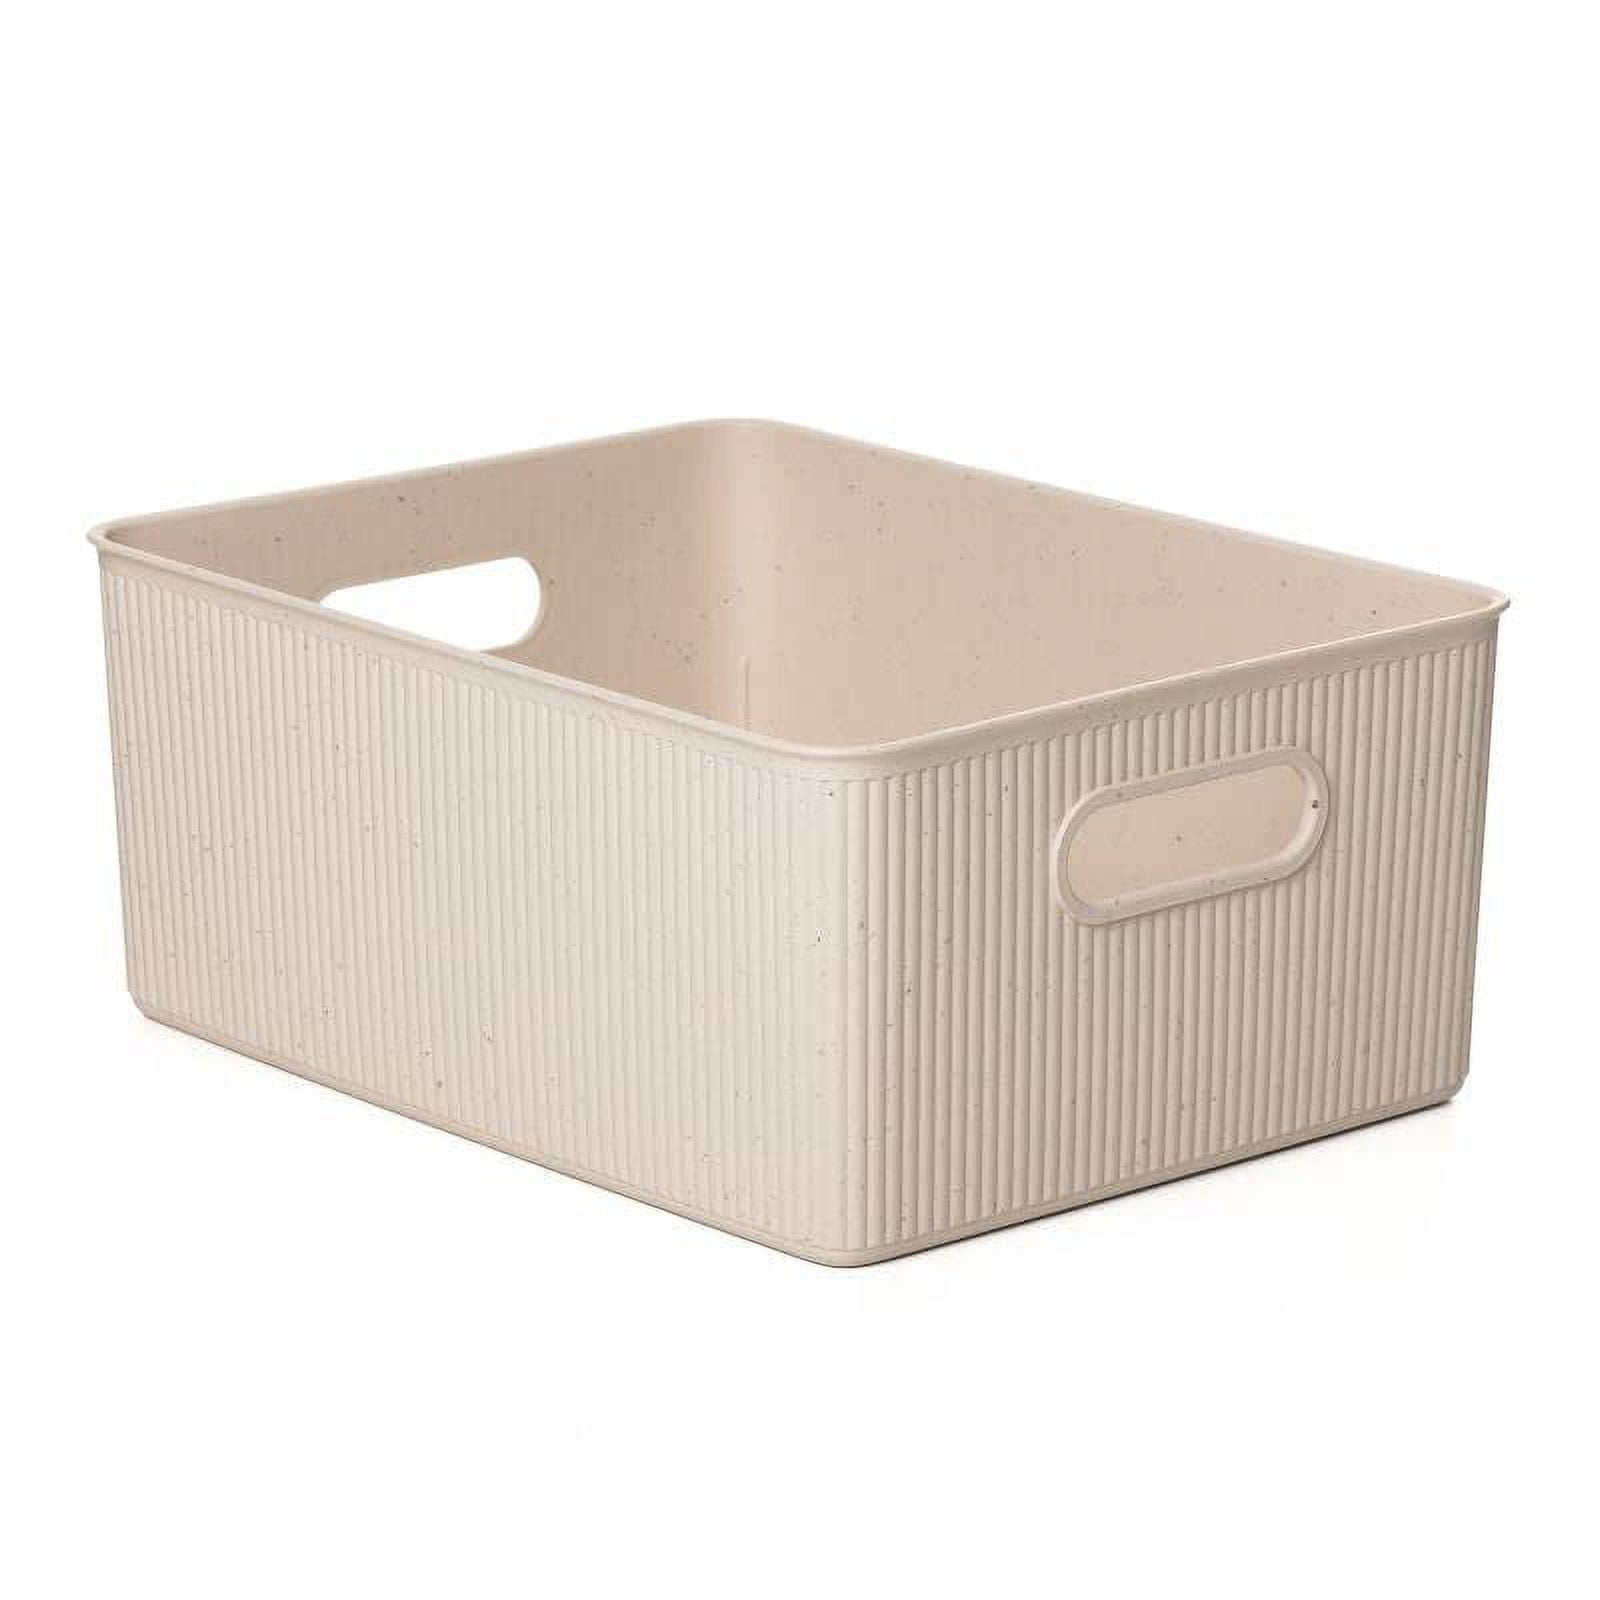 Eco-Friendly Decorative Plastic Open Home Storage Bins Organizer Baskets,  Large (1 Pack) Container Boxes for Organizing Closet Shelves Drawer Shelf -  Ribbed Collection 15 Liter/16 Quart 